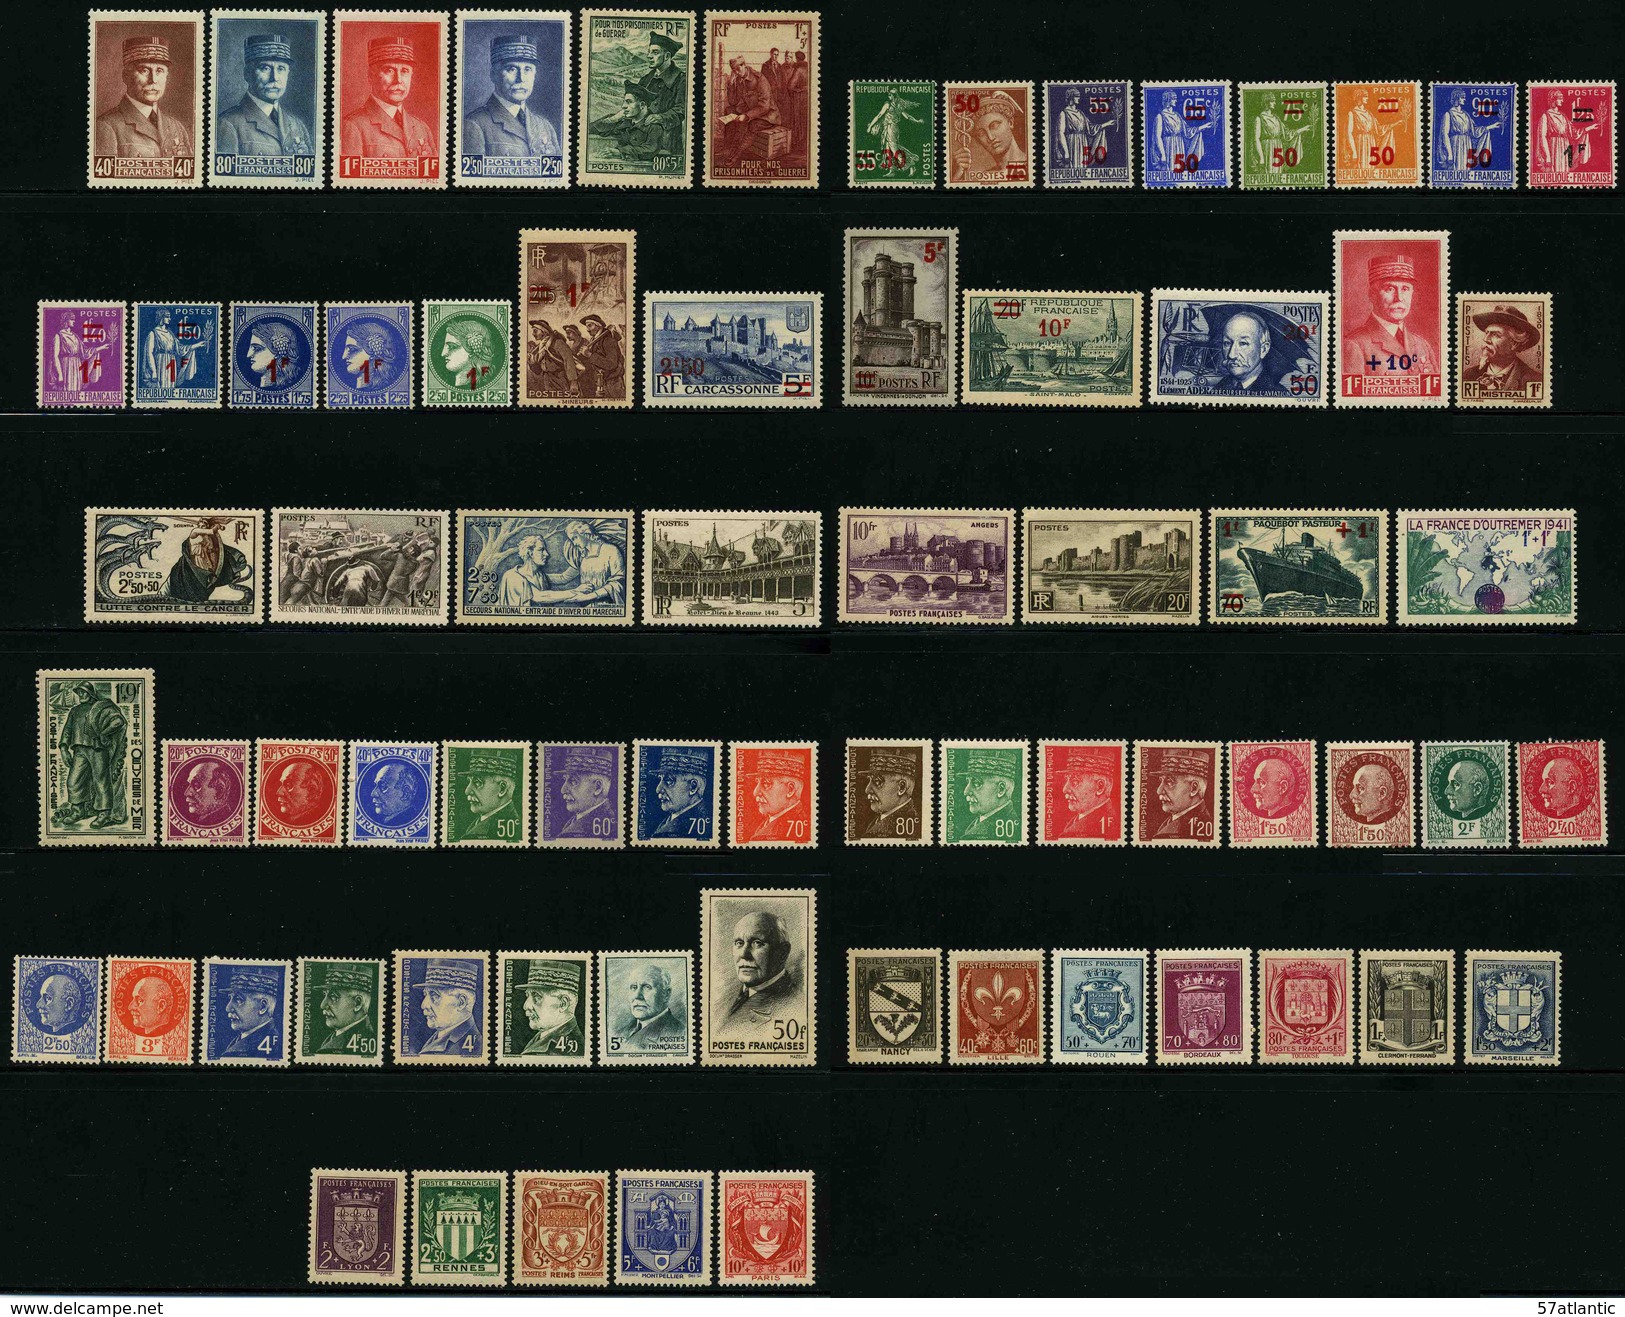 FRANCE - ANNEE COMPLETE 1941 - YT 470 à 537 ** - 70 TIMBRES NEUFS ** - 1940-1949